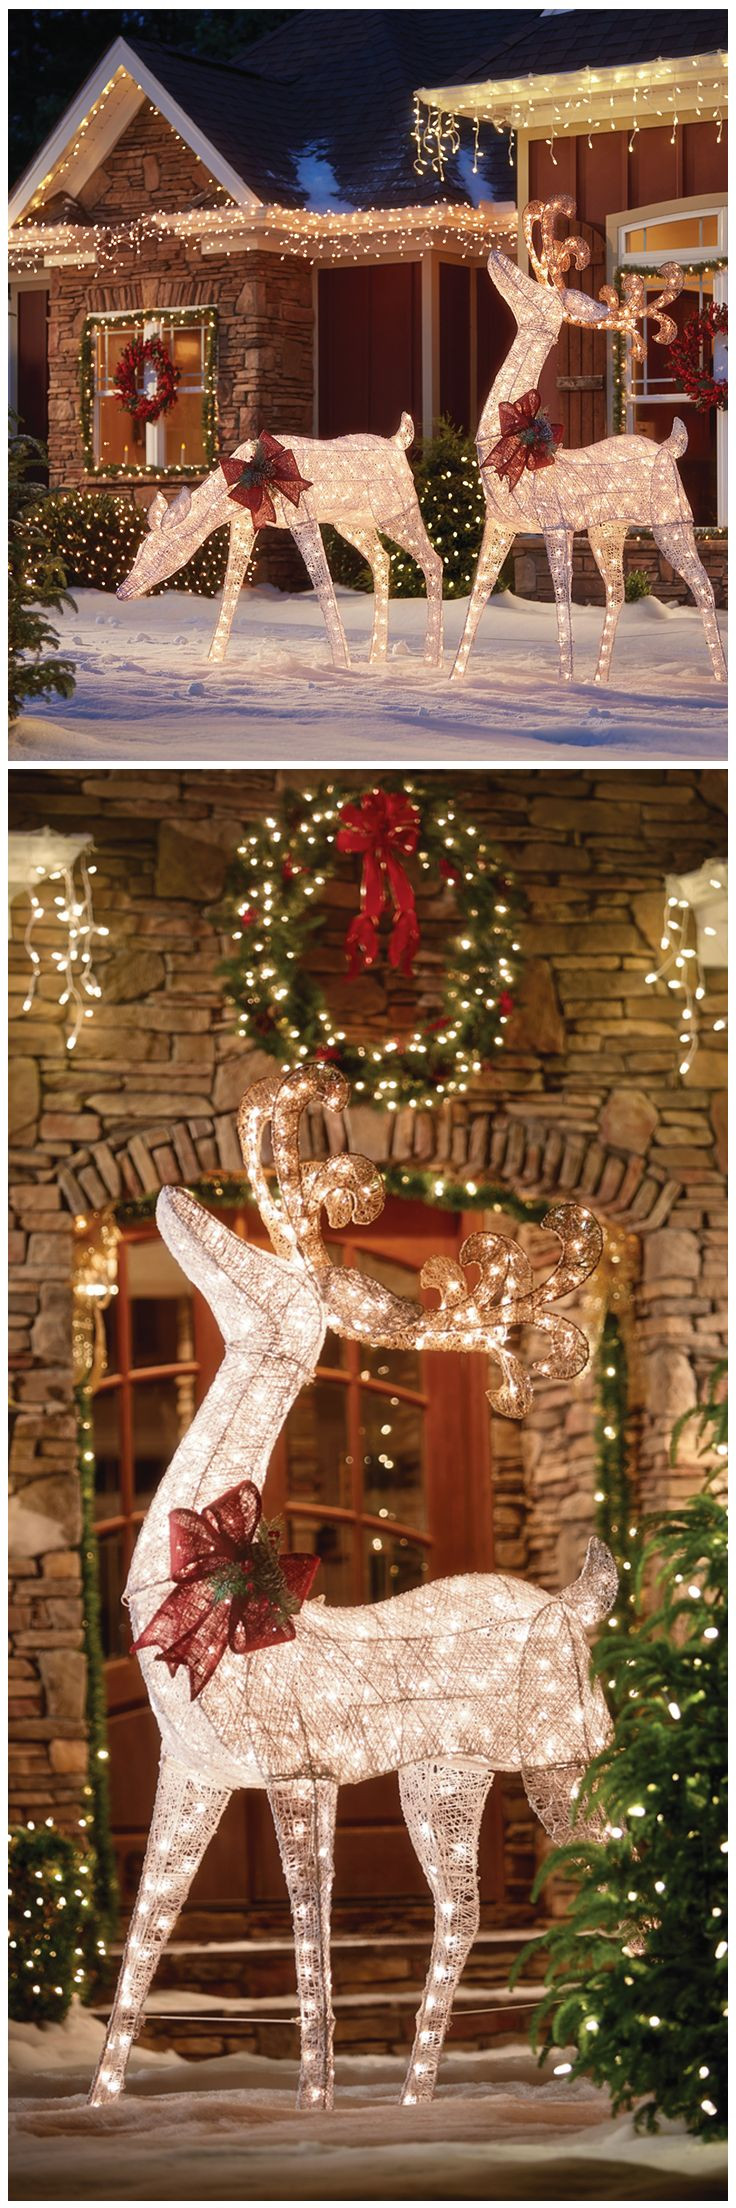 Outdoor Hanging Christmas Decorations
 These luminous deer figures will add a classic rustic